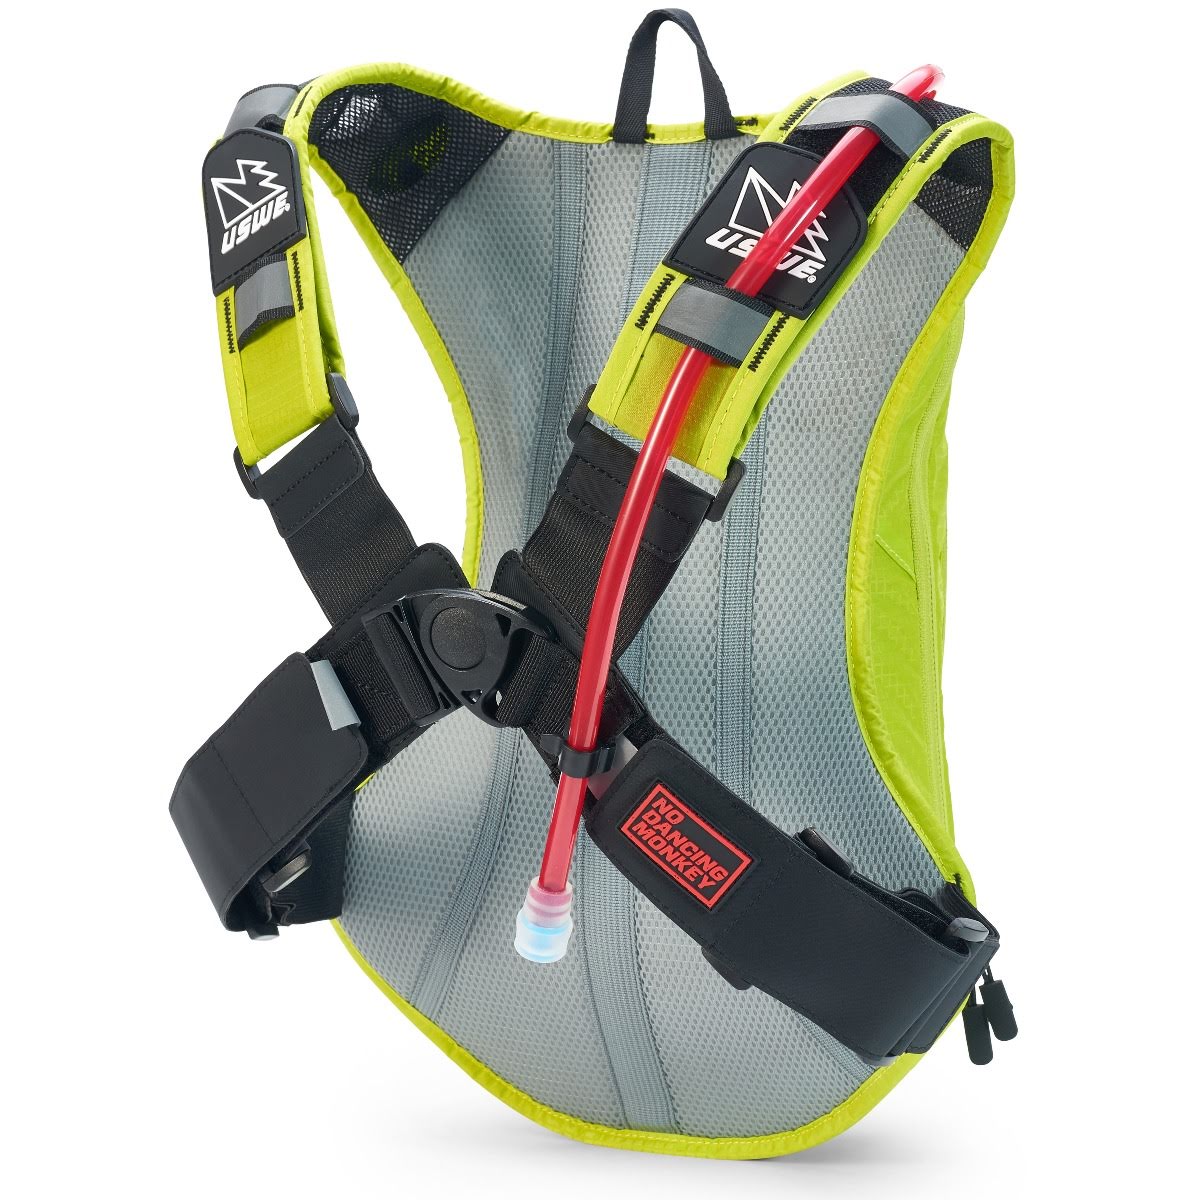 USWE Outlander 9 Hydration Backpack Crazy Yellow – With 3 Litre Bladder